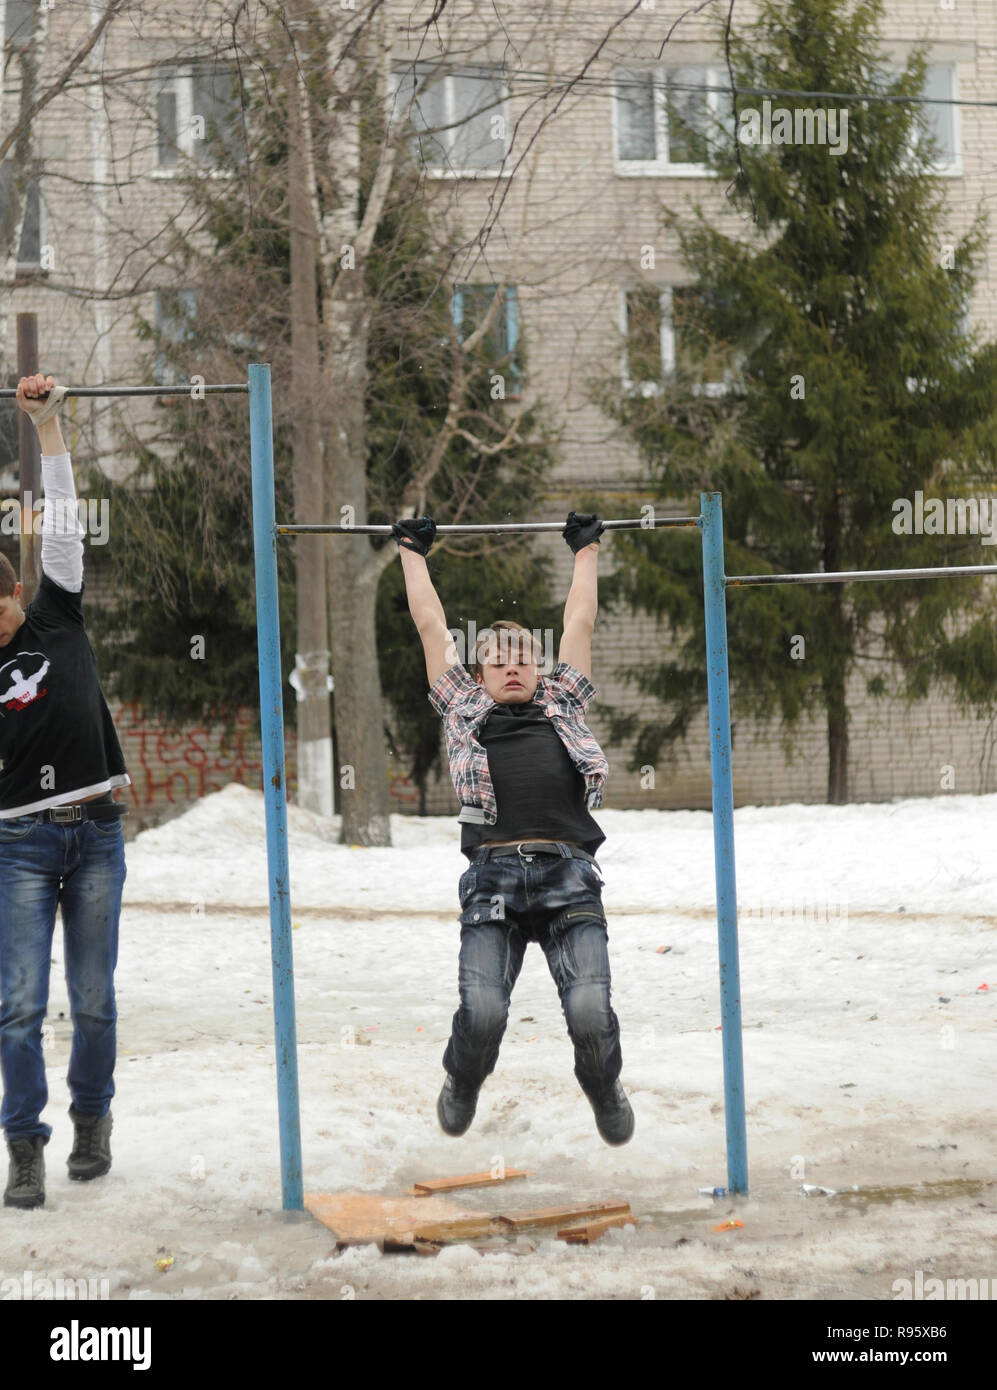 Kovrov, Russia. 4 April 2013. Teens is engaged in discipline gimbarr on a horizontal bar in the courtyard of a multi-storey residential building Stock Photo